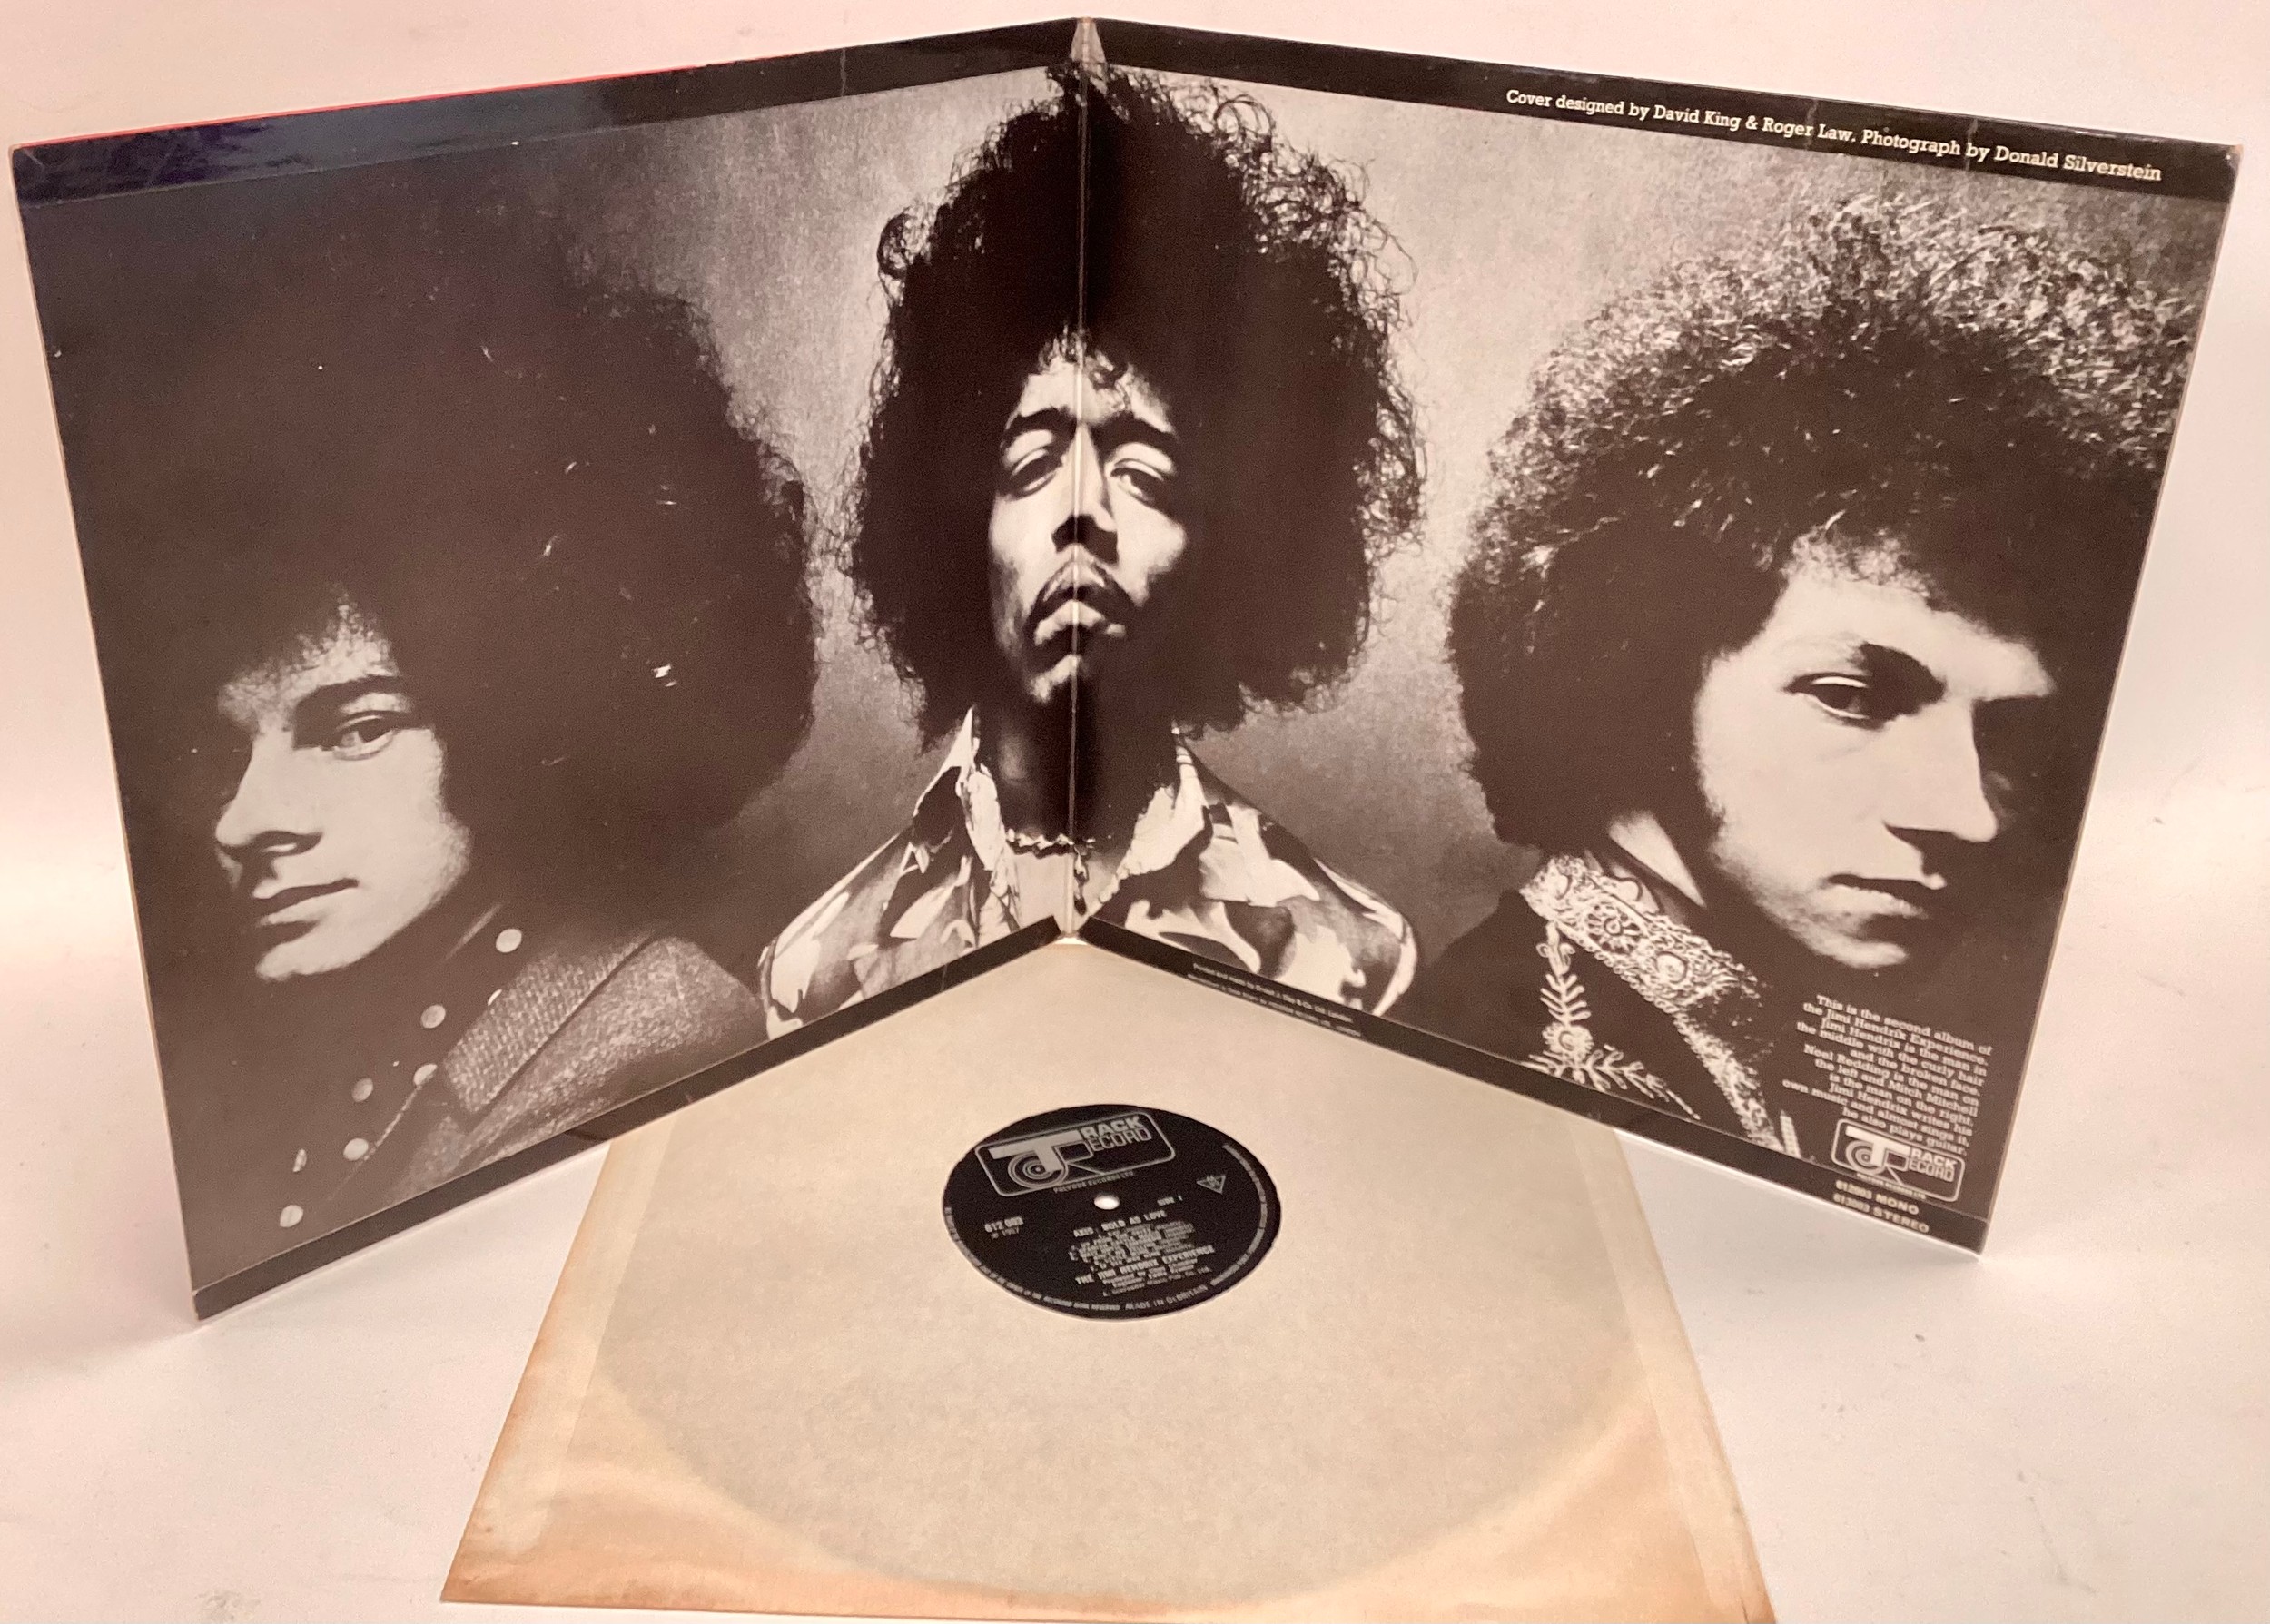 THE JIMI HENDRIX EXPERIENCE ‘AXIS BOLD AS LOVE’ VINYL ALBUM. This original Track label 612003 was - Image 3 of 6